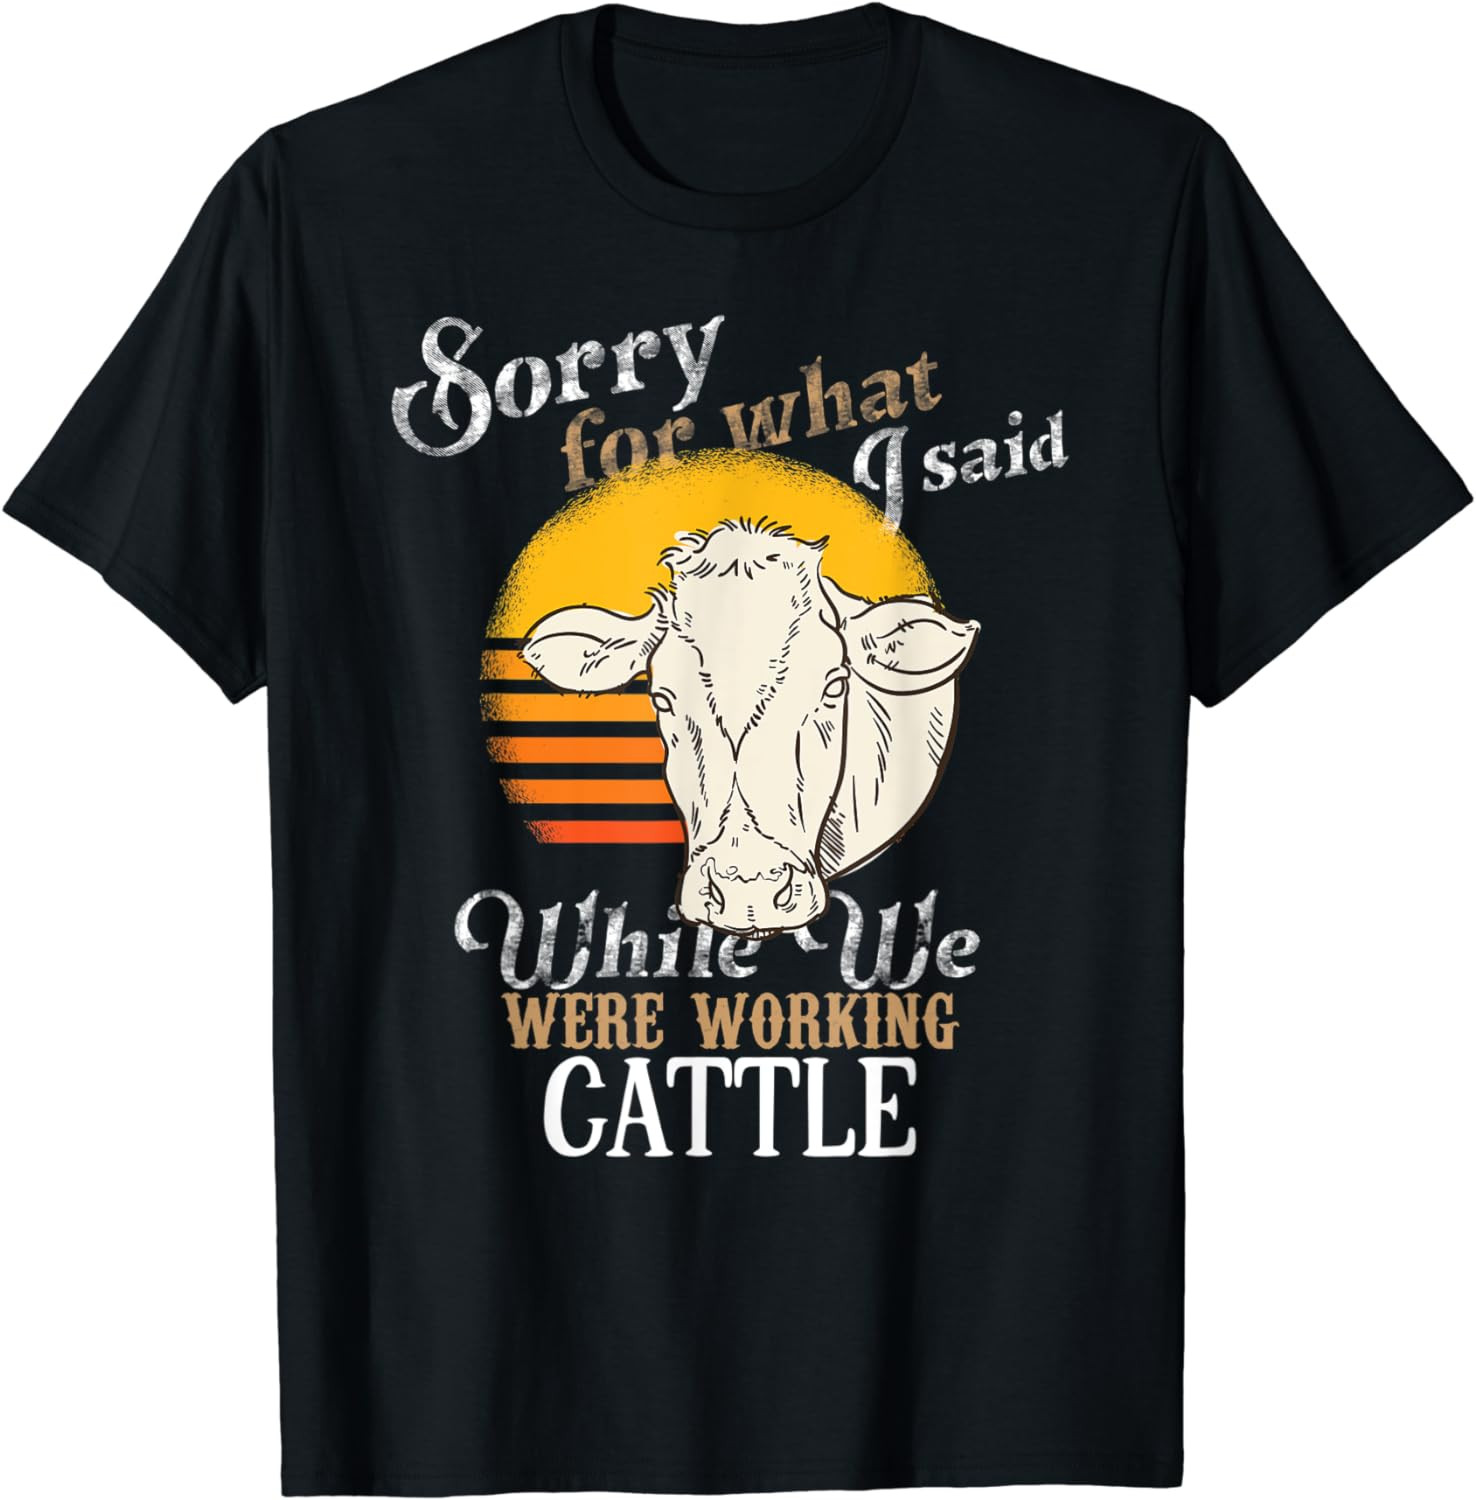 Sorry For What I Said While We Were Working Cattle T-Shirt